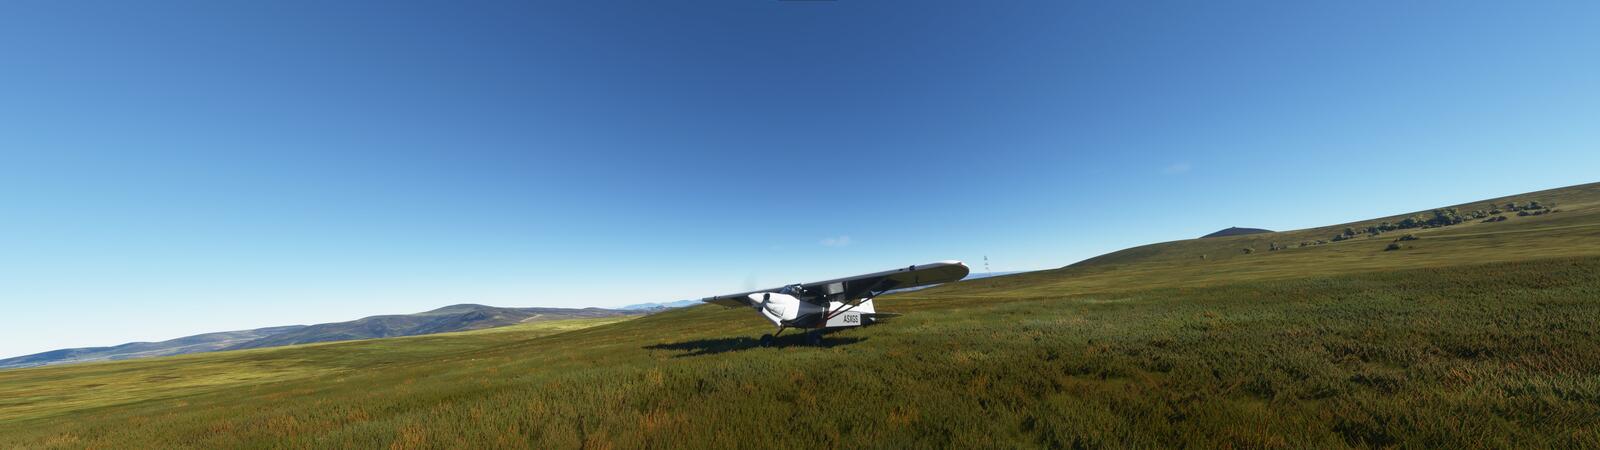 Wallpapers aircraft field game landscape on the desktop